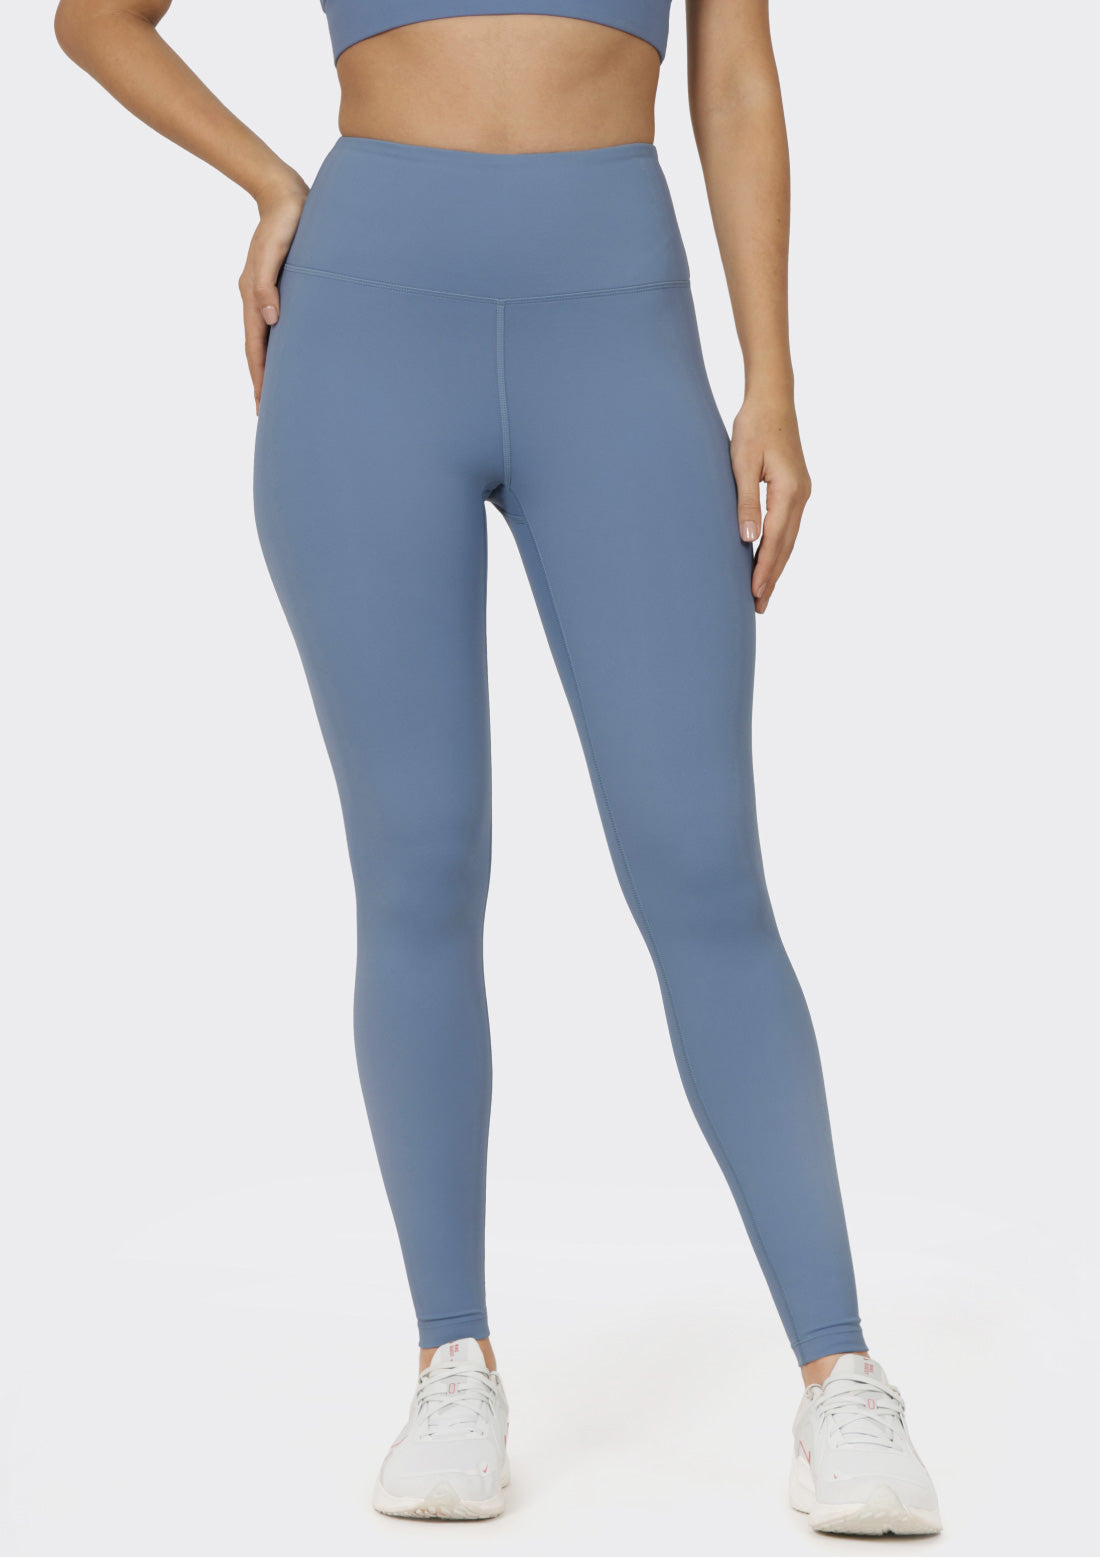 Essential Leggings with Pockets - Graphite | Women's Best